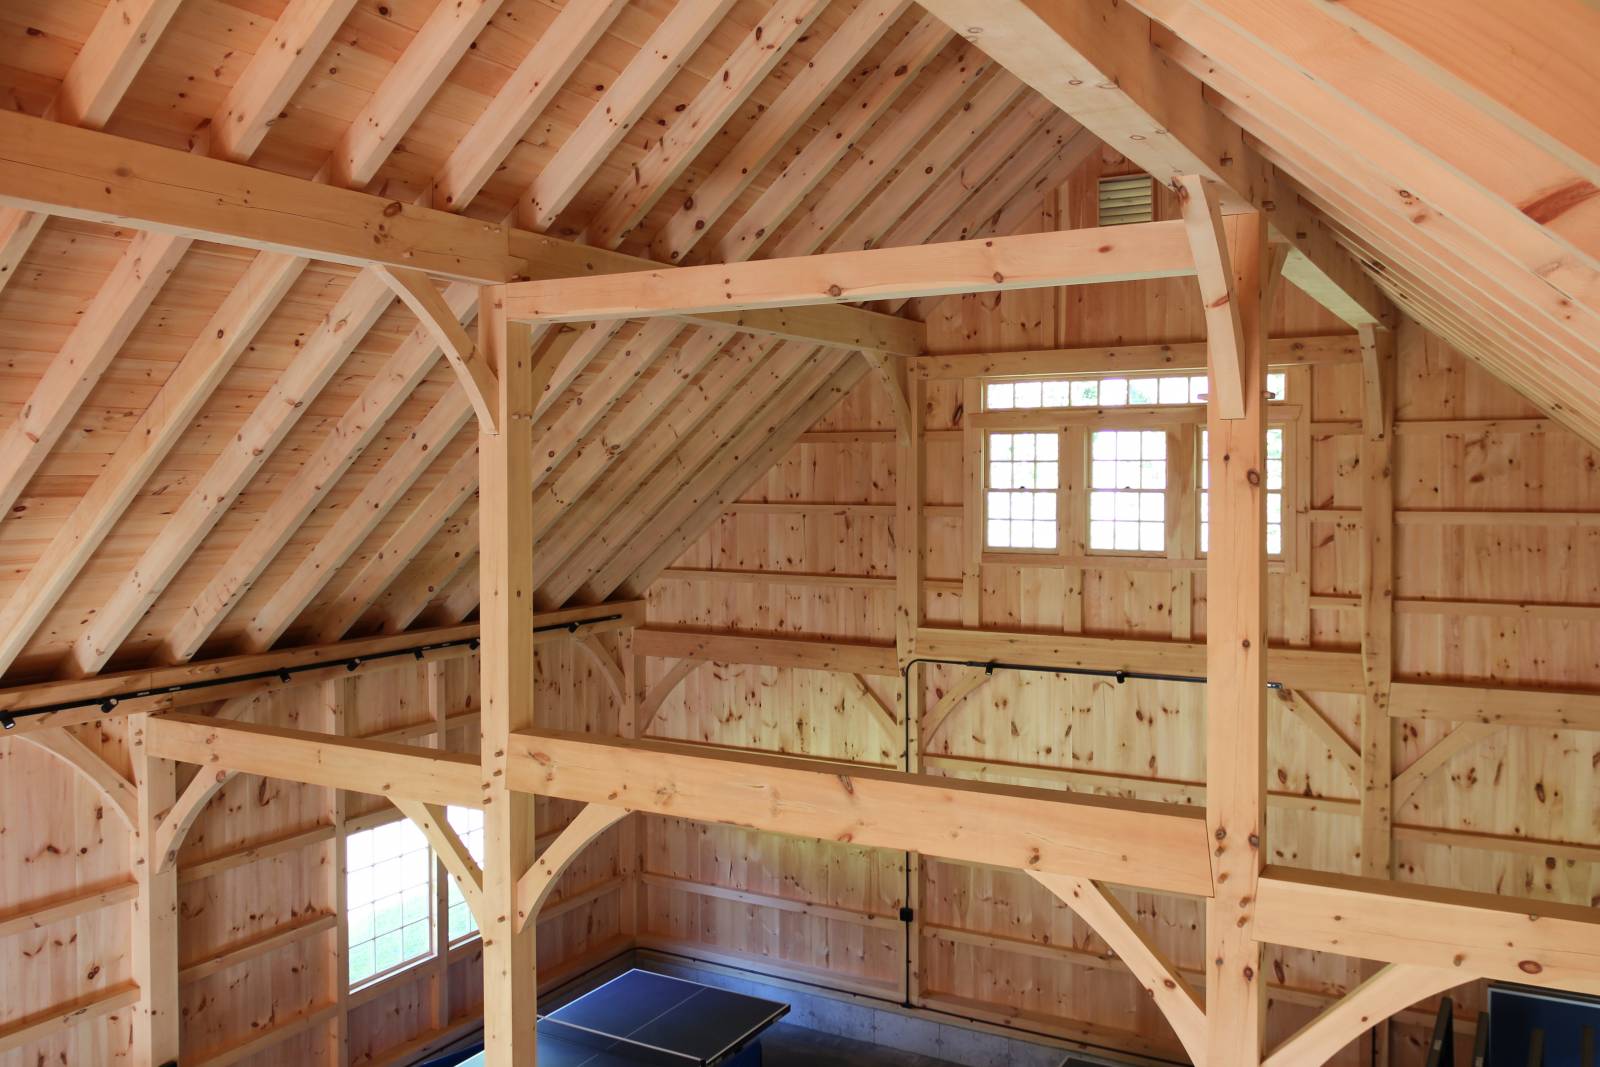 Floor to Ceiling Posts in Post & Beam Barn • Supporting the Mid-Span of the Rafters • Cathedral Ceiling